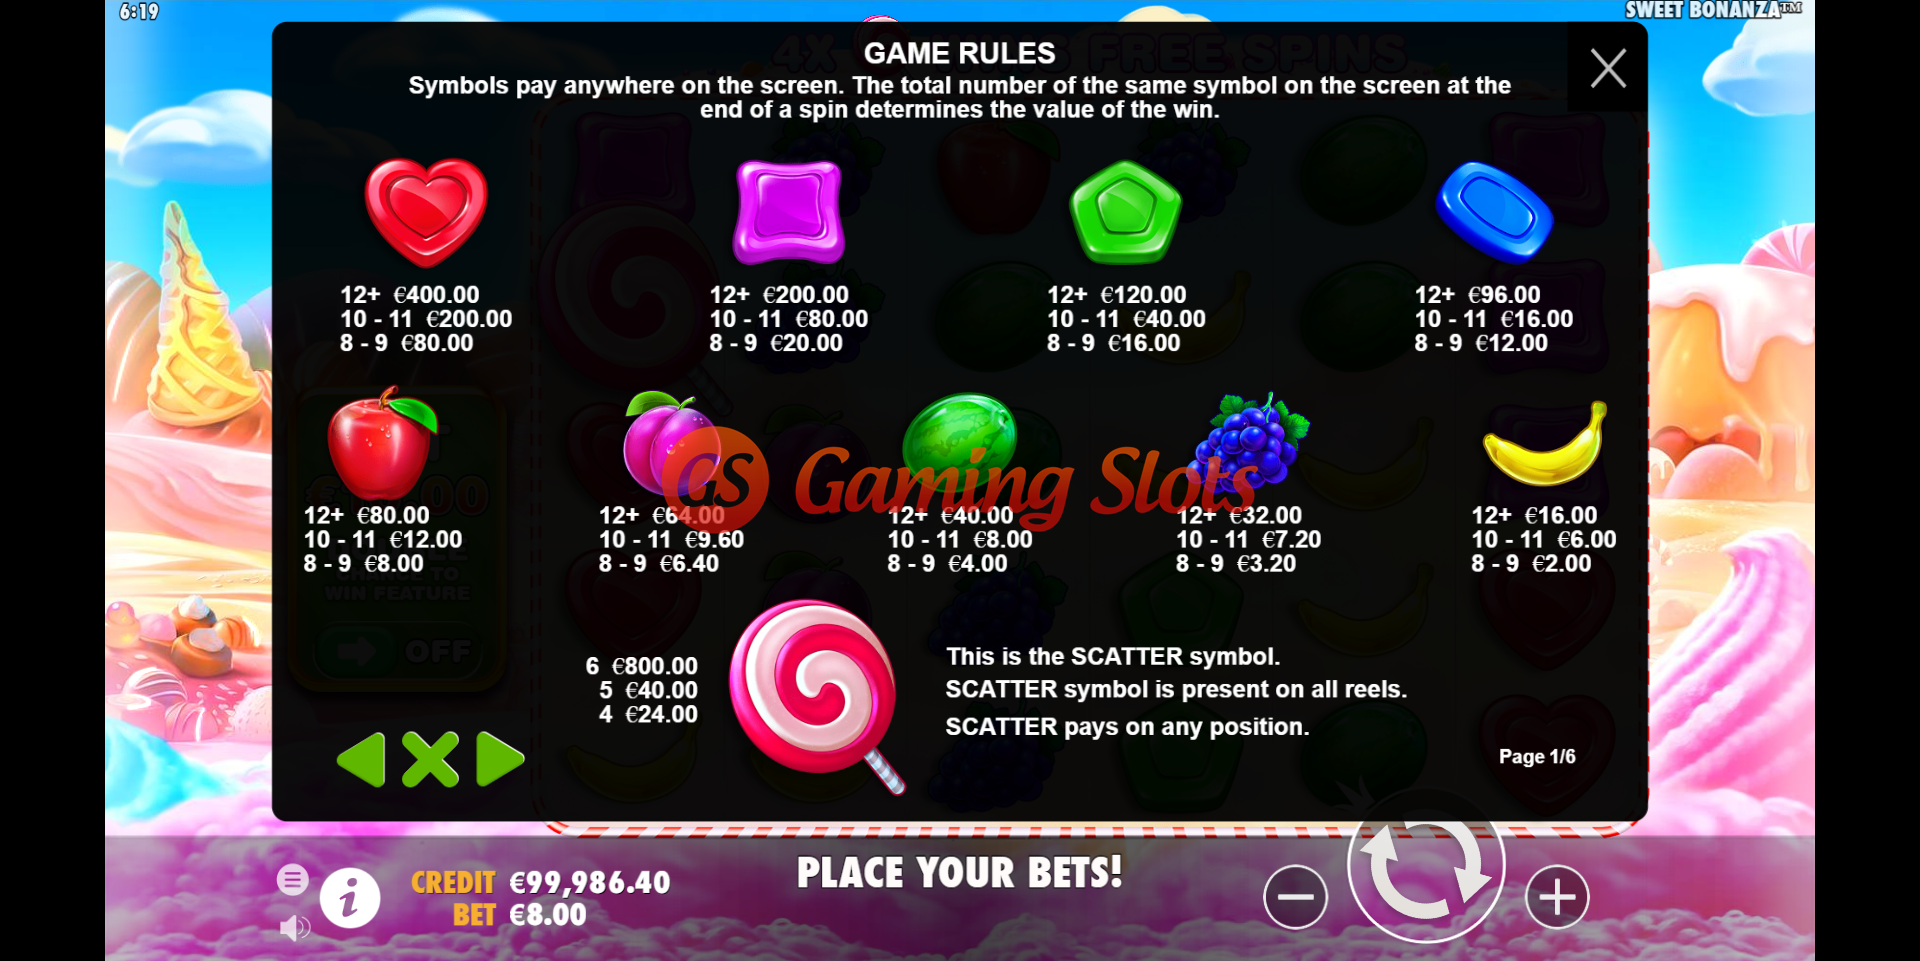 Game Rules for Sweet Bonanza slot from Pragmatic Play